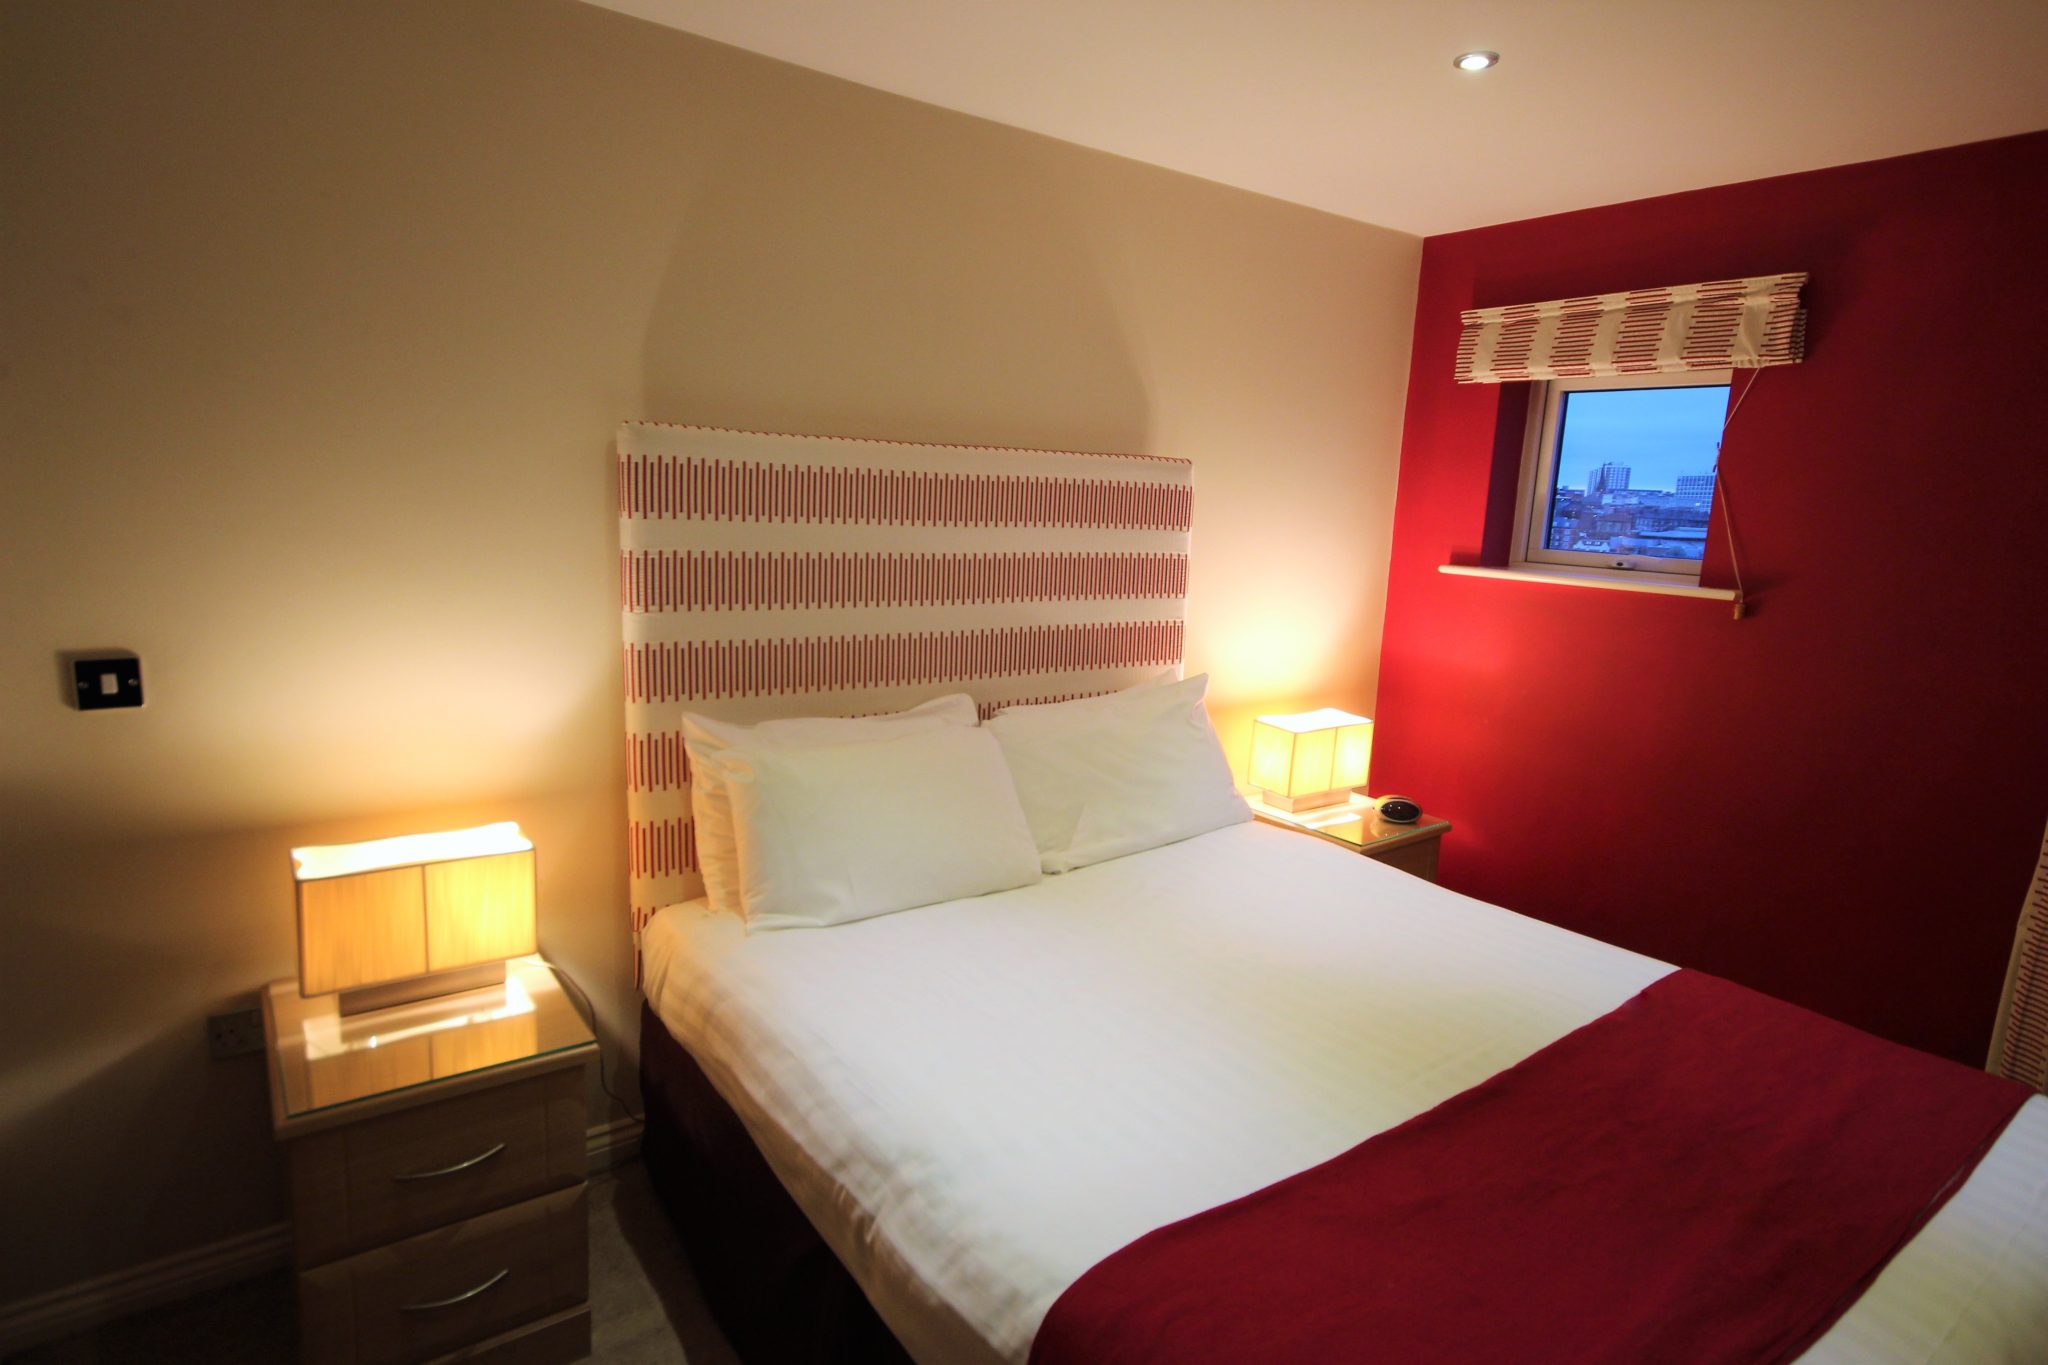 Book-Newcastle-Serviced-Accommodation-today-at-Low-Cost!-Curzon-Place-Apartments-offer-modern-Short-Lets-in-North-East-England!-Free-WIFI-&-Parking!-Urban-Stay